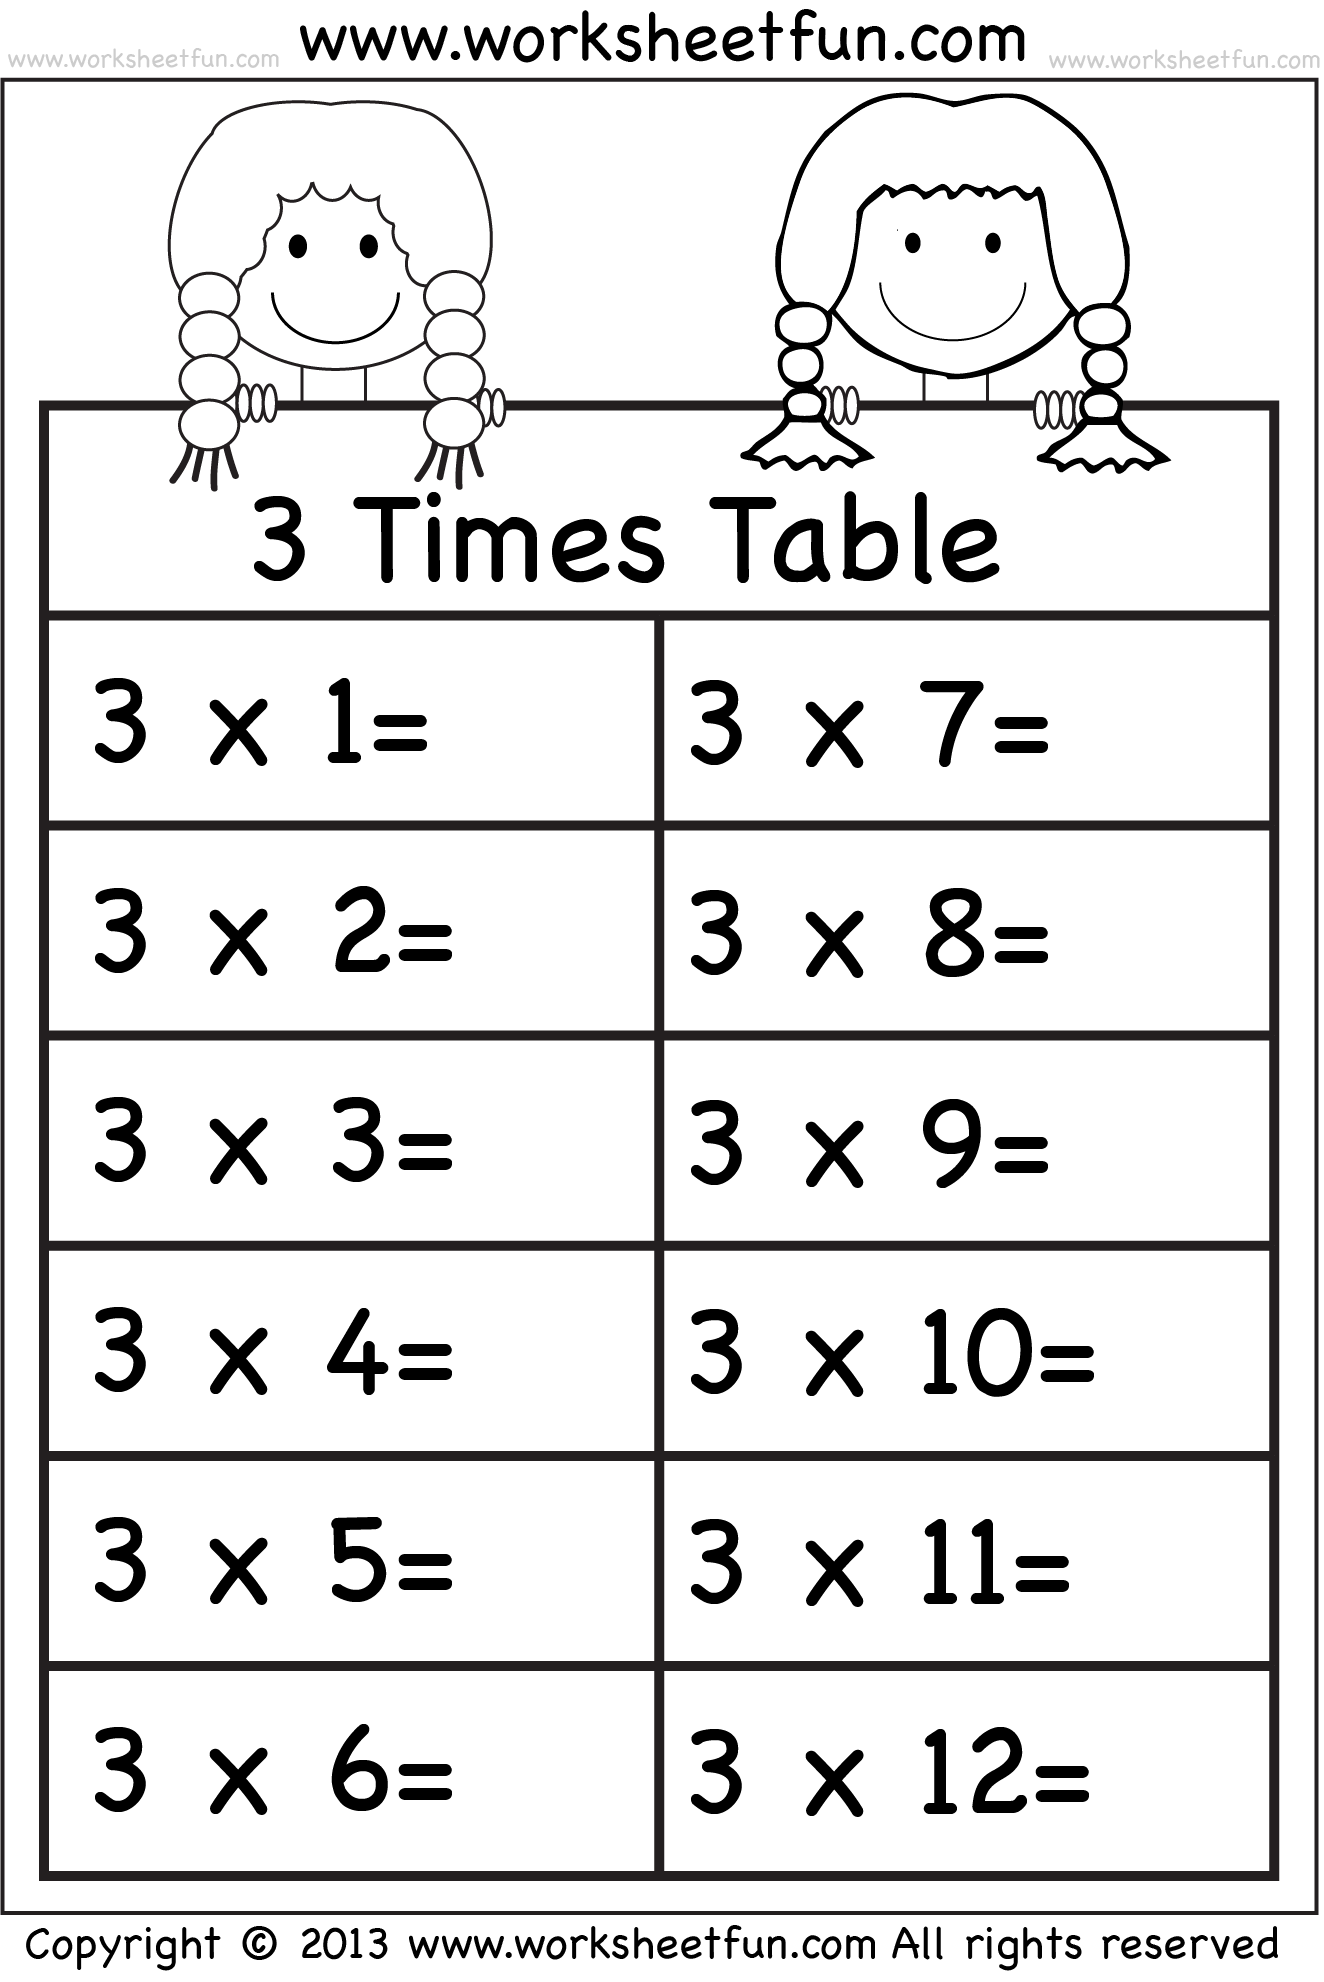 Times Tables Worksheets – 22, 22, 22, 22, 22, 22, 22, 22, 22, 22 and 222 With 3 Times Table Worksheet